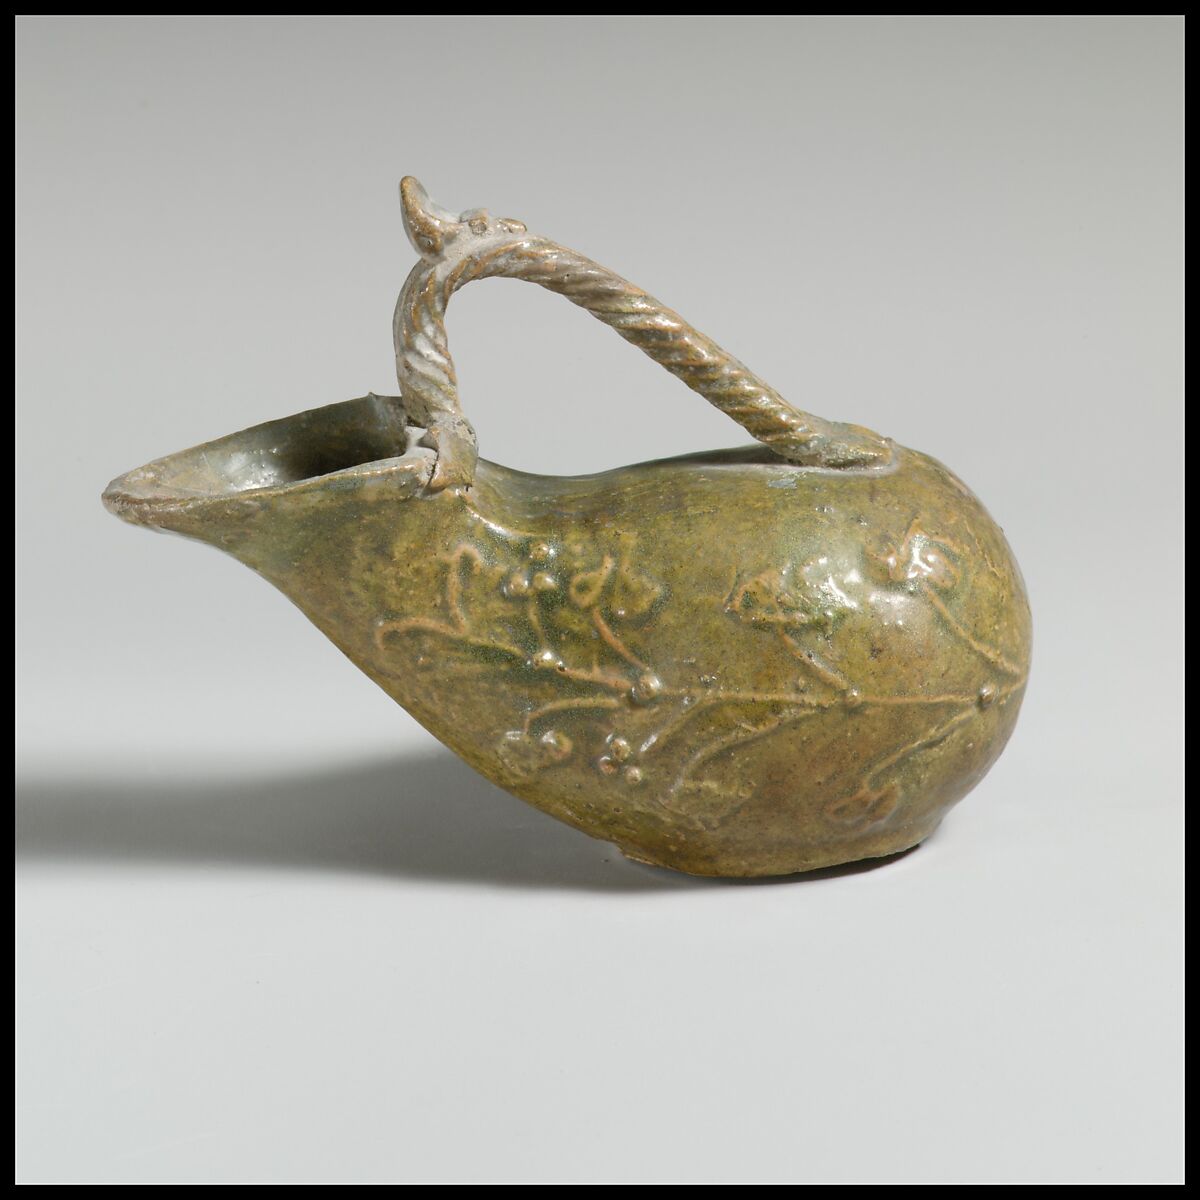 Terracotta askos (flask with a spout and handle over the top), Terracotta, Roman 